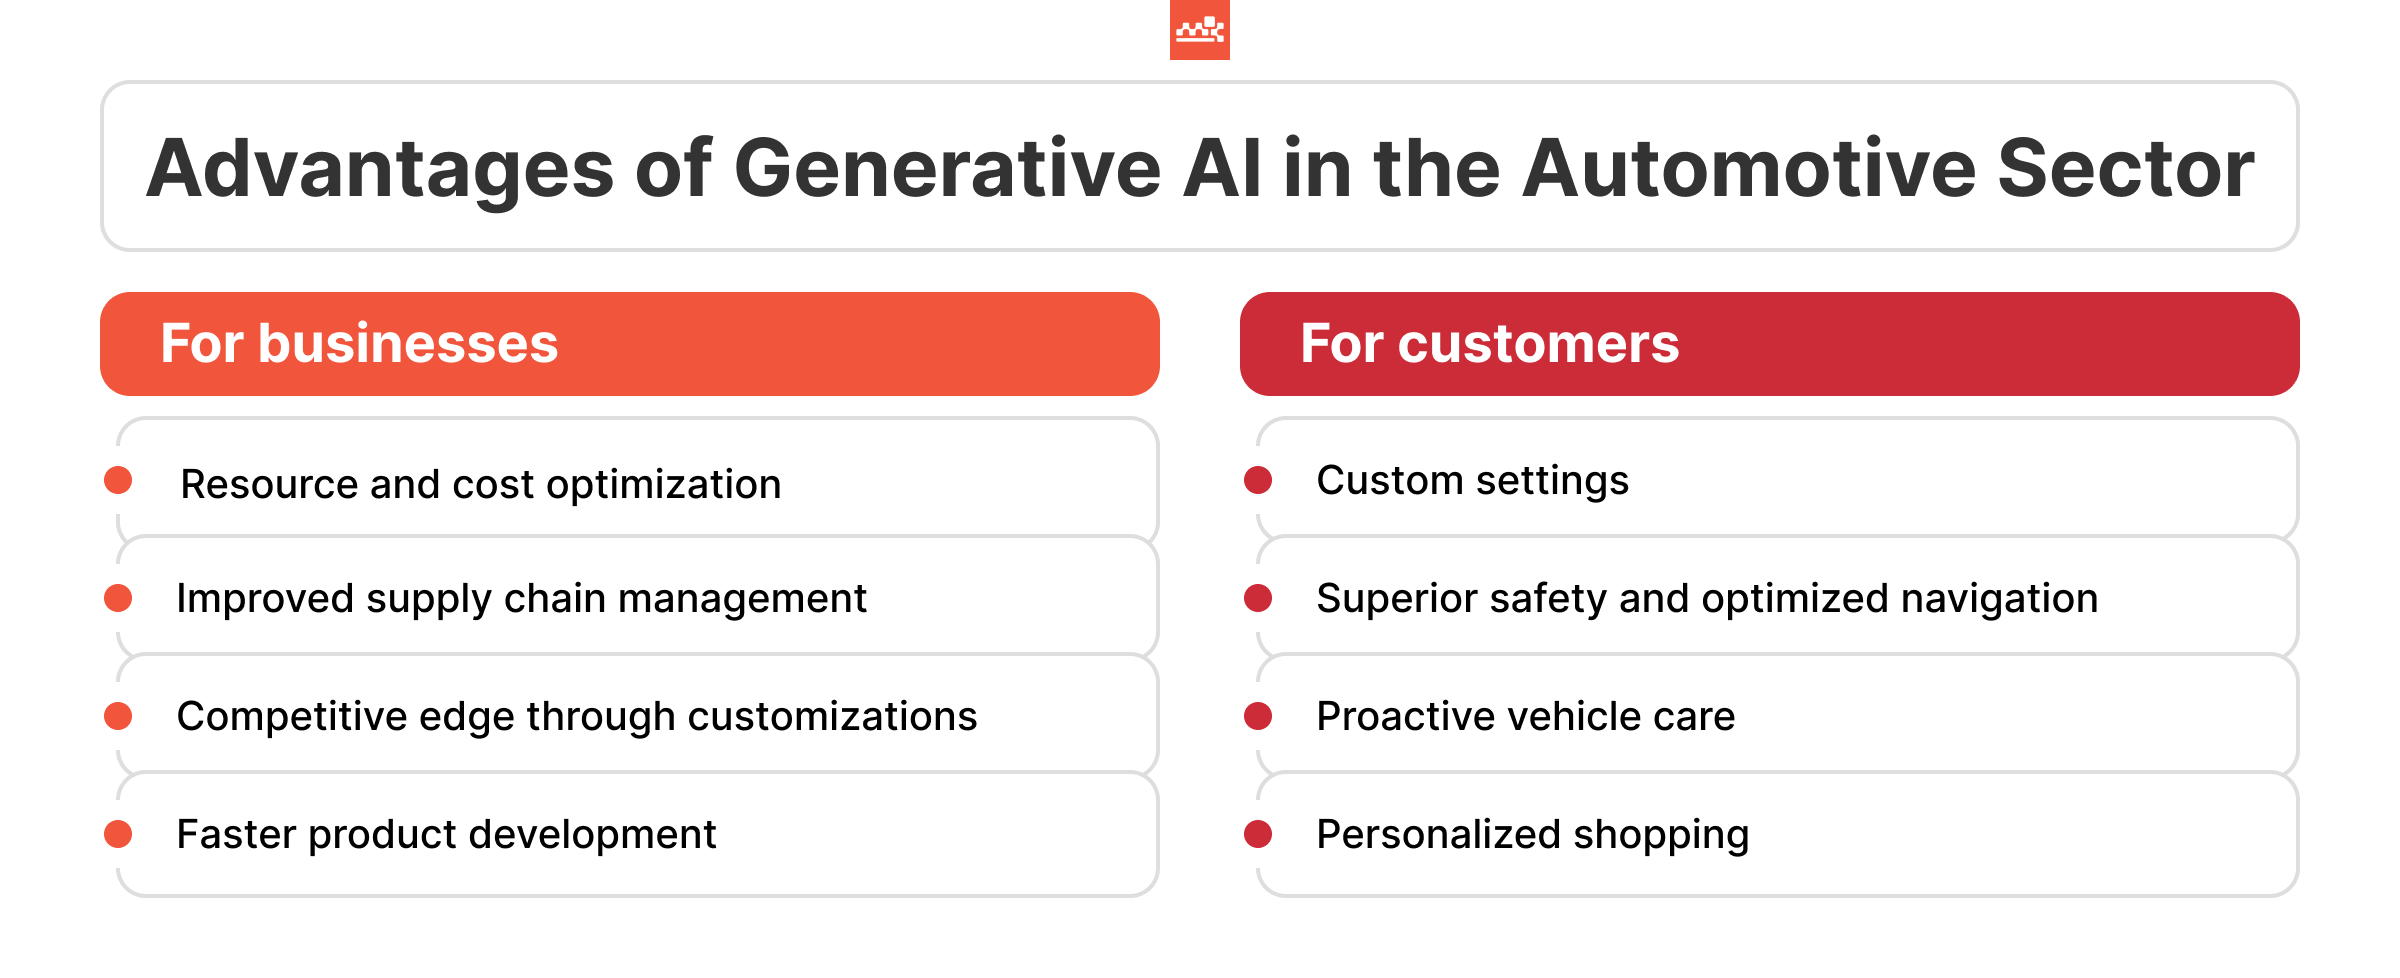 Advantages of Generative AI in the Automotive